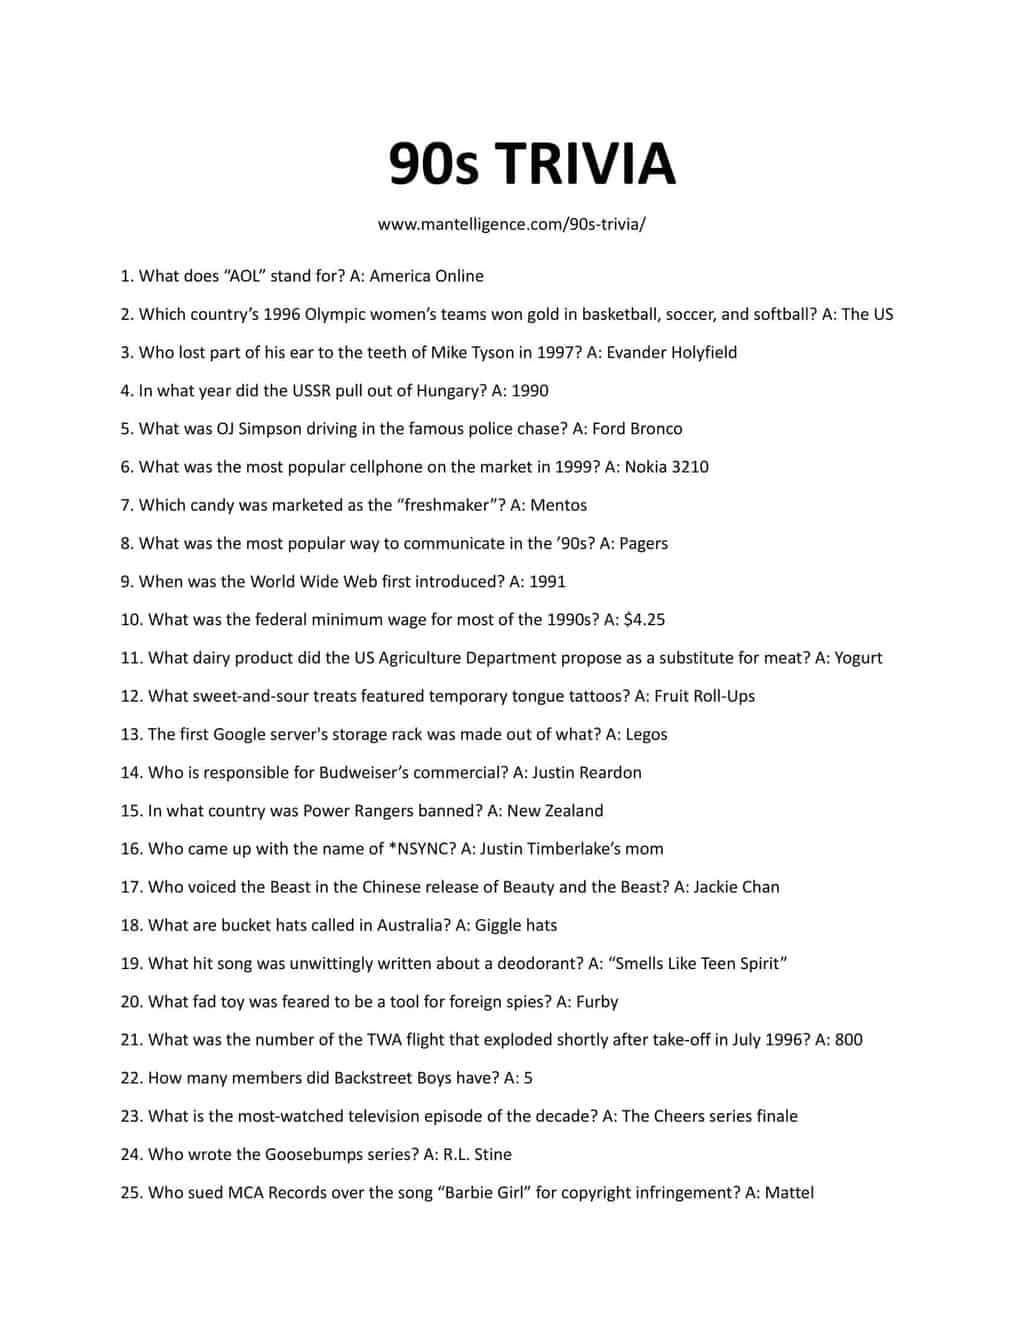 90s-trivia-questions-and-answers-printable